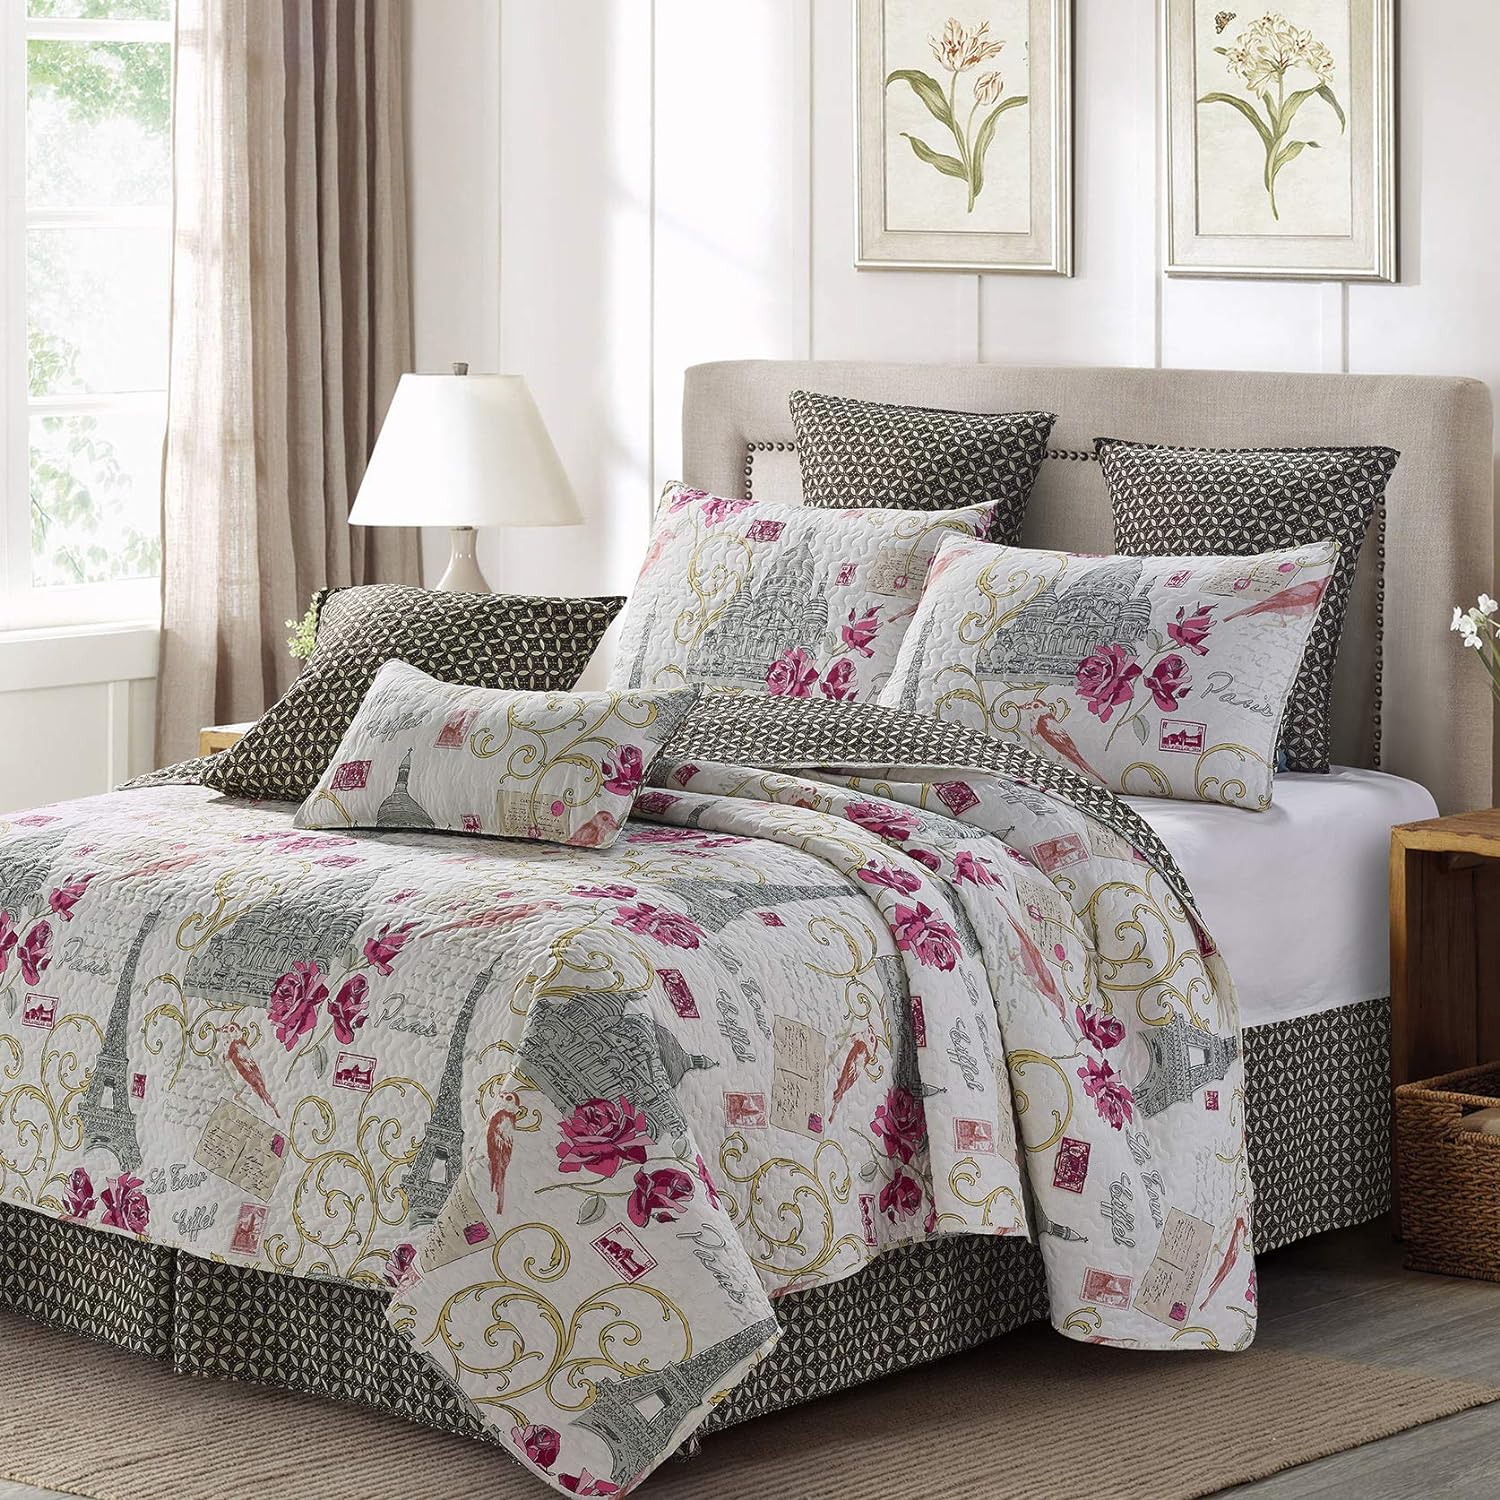 Virah Bella Quilt Bedding Set in Full/Queen Paris Love Printed Lightweight Reversible Quilt with 2 Matching Pillow Shams - Cozy & Beautiful Contemporary-Themed Bedding